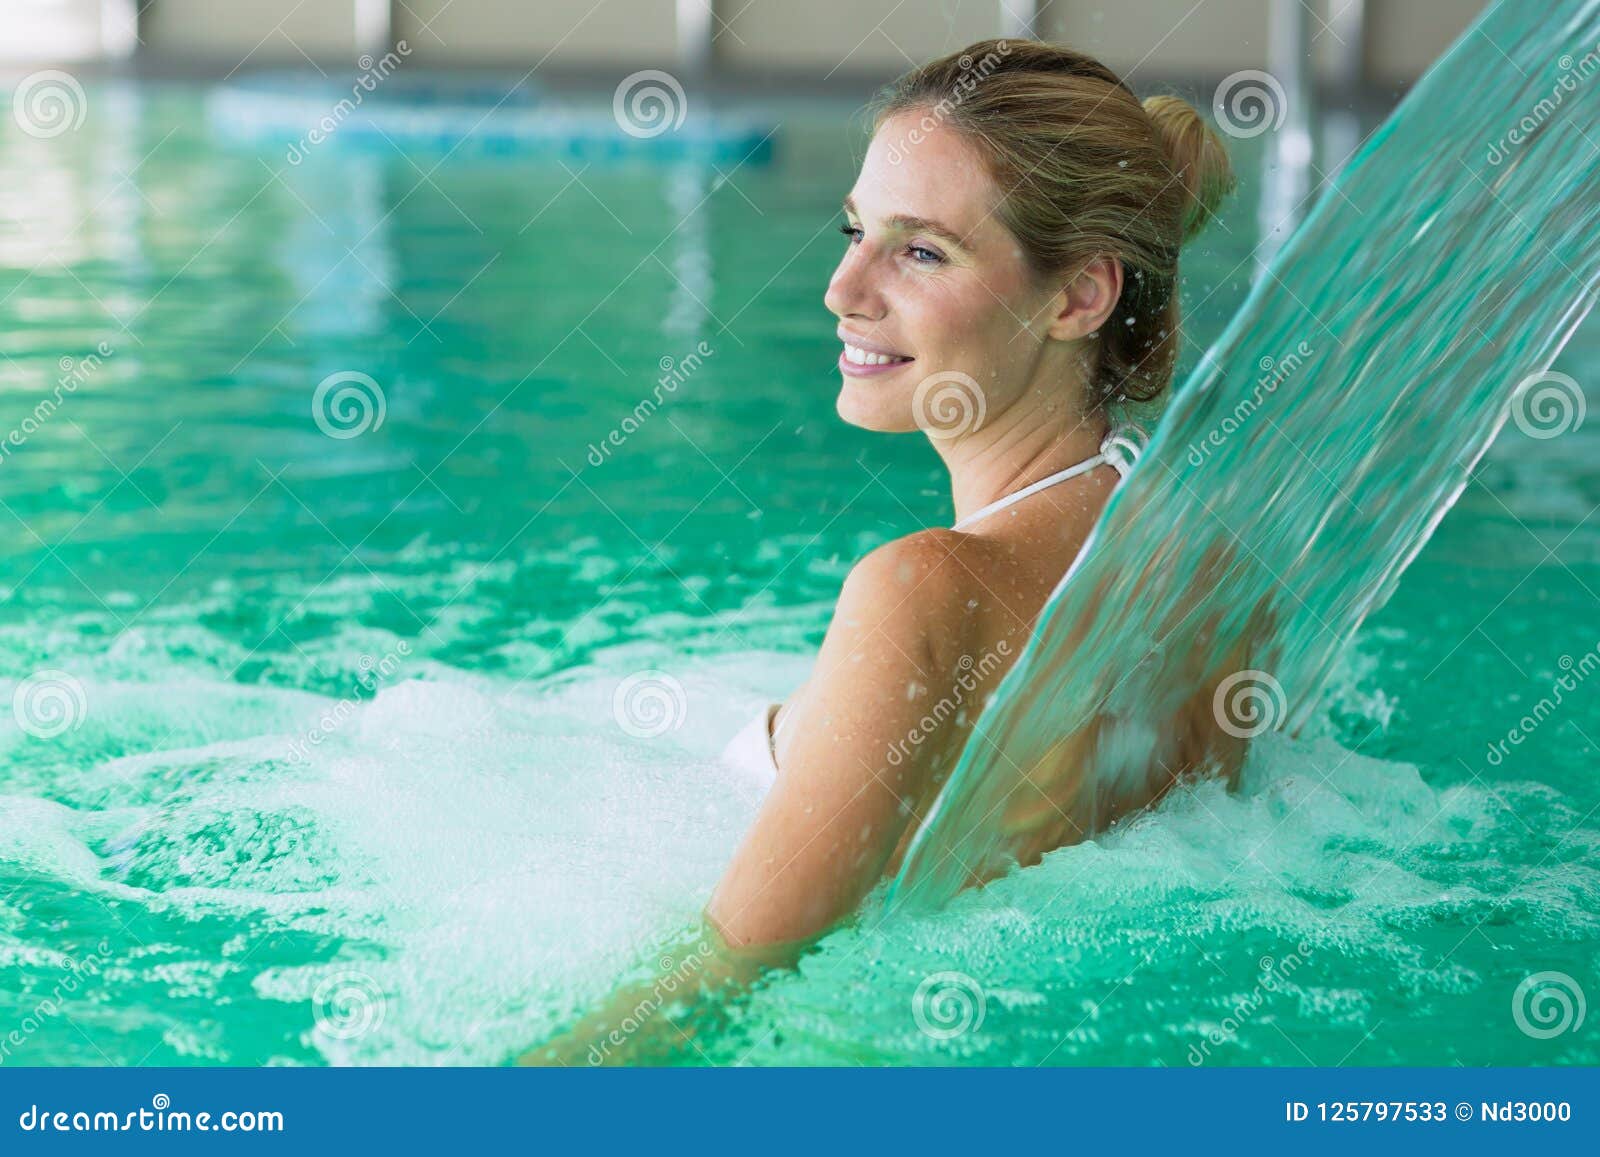 Beautiful Attractive Woman Enjoying Time In Pool Stock Image Image Of